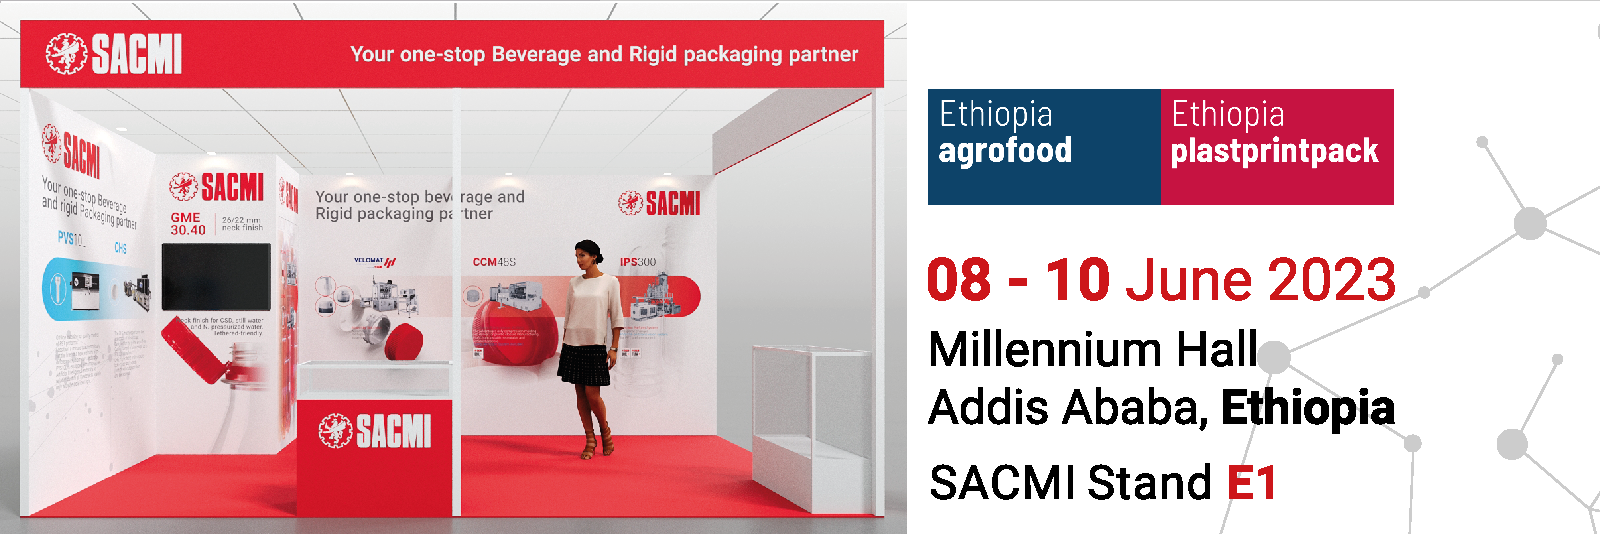  Exemplary excellence: SACMI at Agrofood Ethiopia 2023